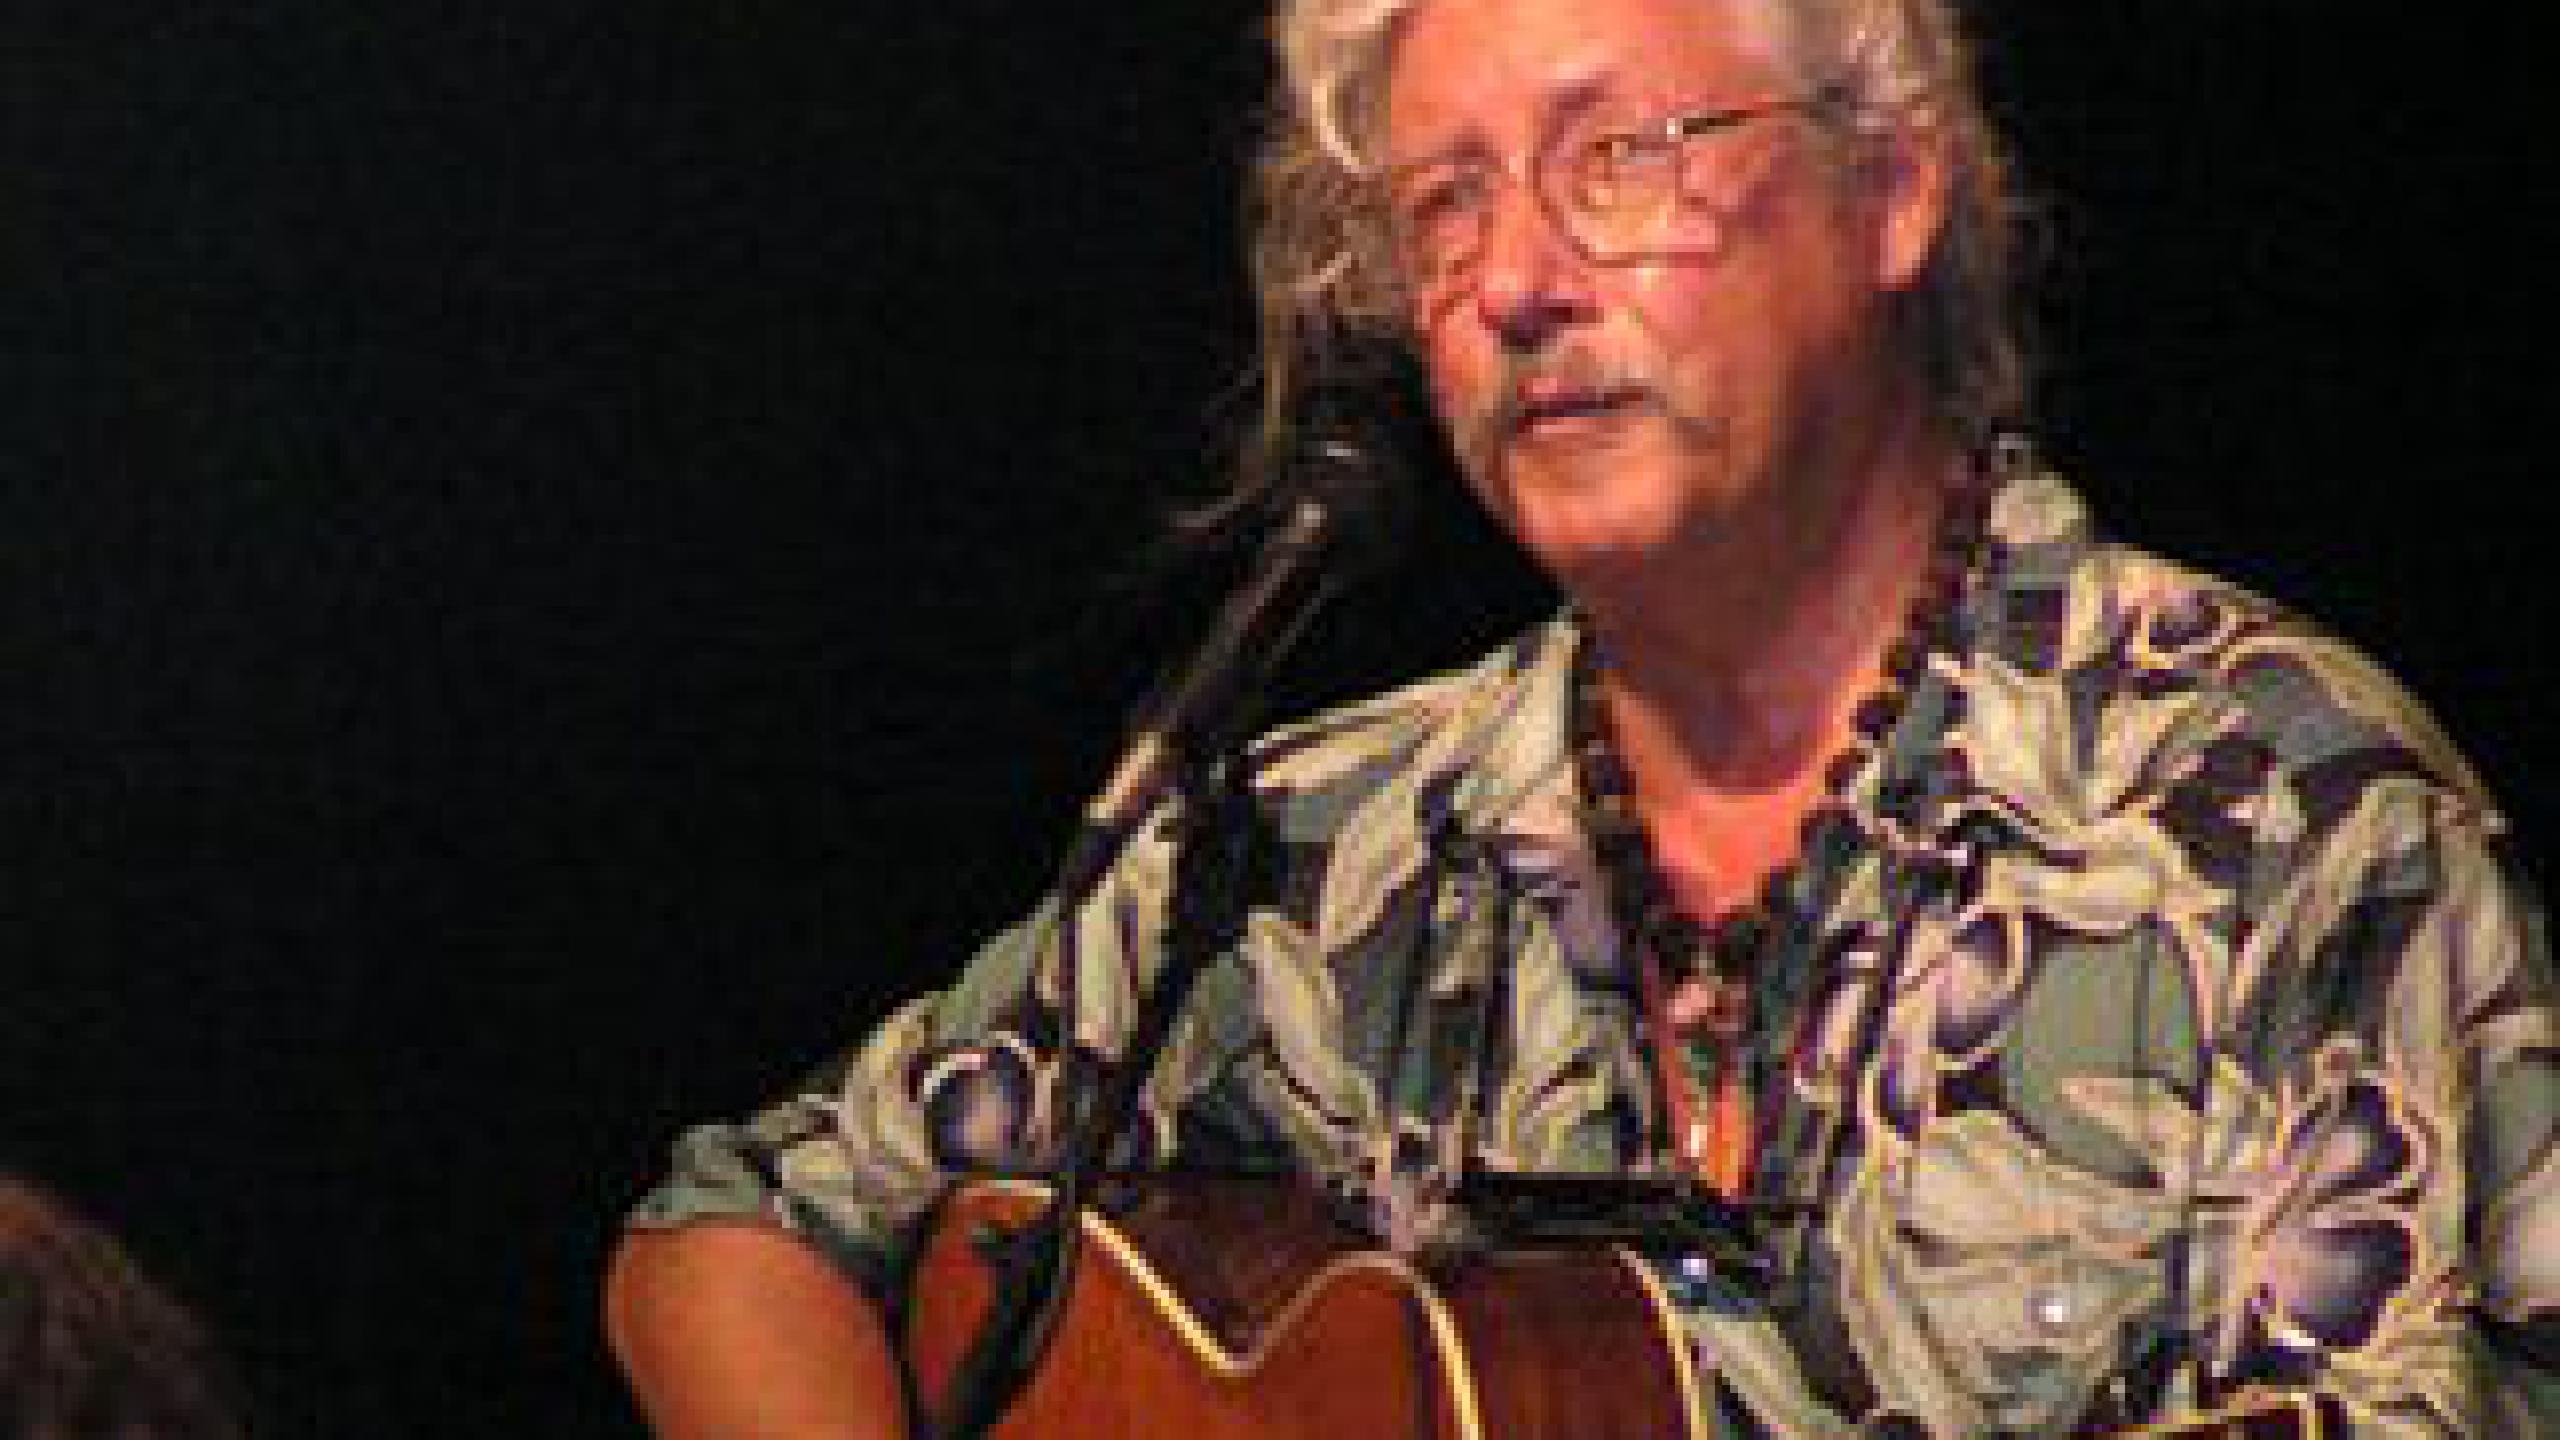 Arlo Guthrie tour dates 2022 2023. Arlo Guthrie tickets and concerts